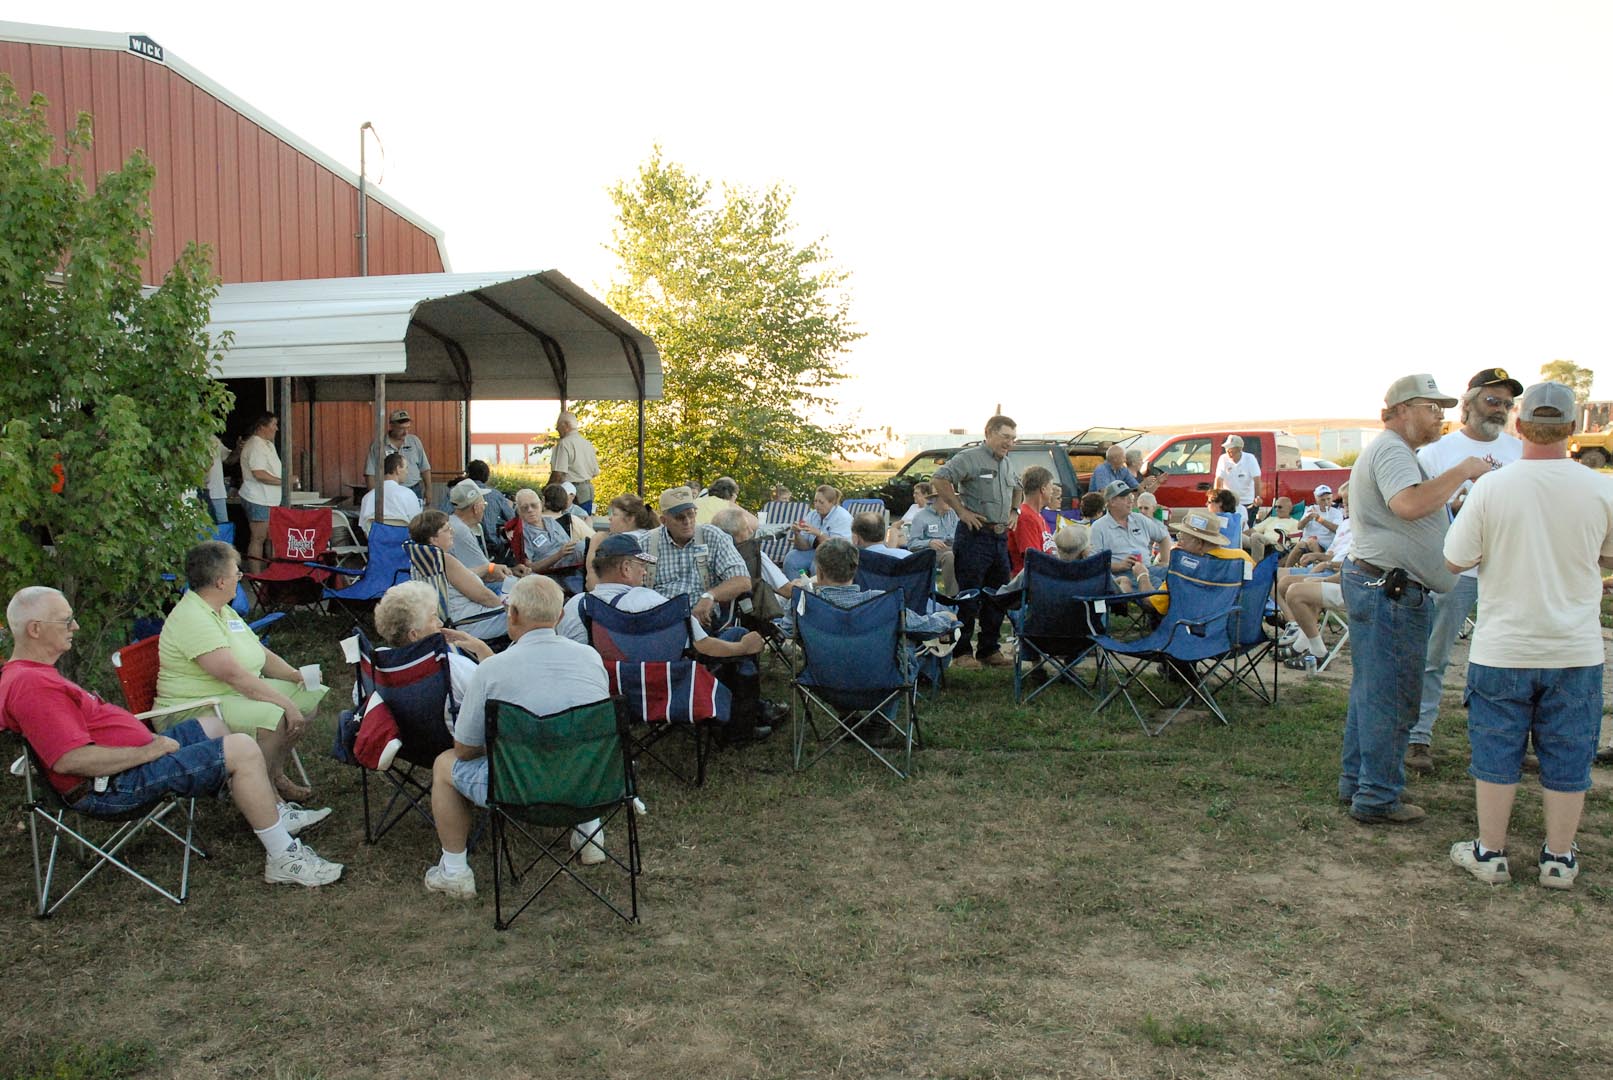 The crowd at Gene Kruse Red Barn in Lincoln, Nebraska, for a Saturday evening chicken dinner. About 100 FENA members and their families attended and enjoyed Gene and Joy's gracious hospitality. There was no formal program  - just good folk sitting around chatting about old tractors and just about anything else that came to mind.